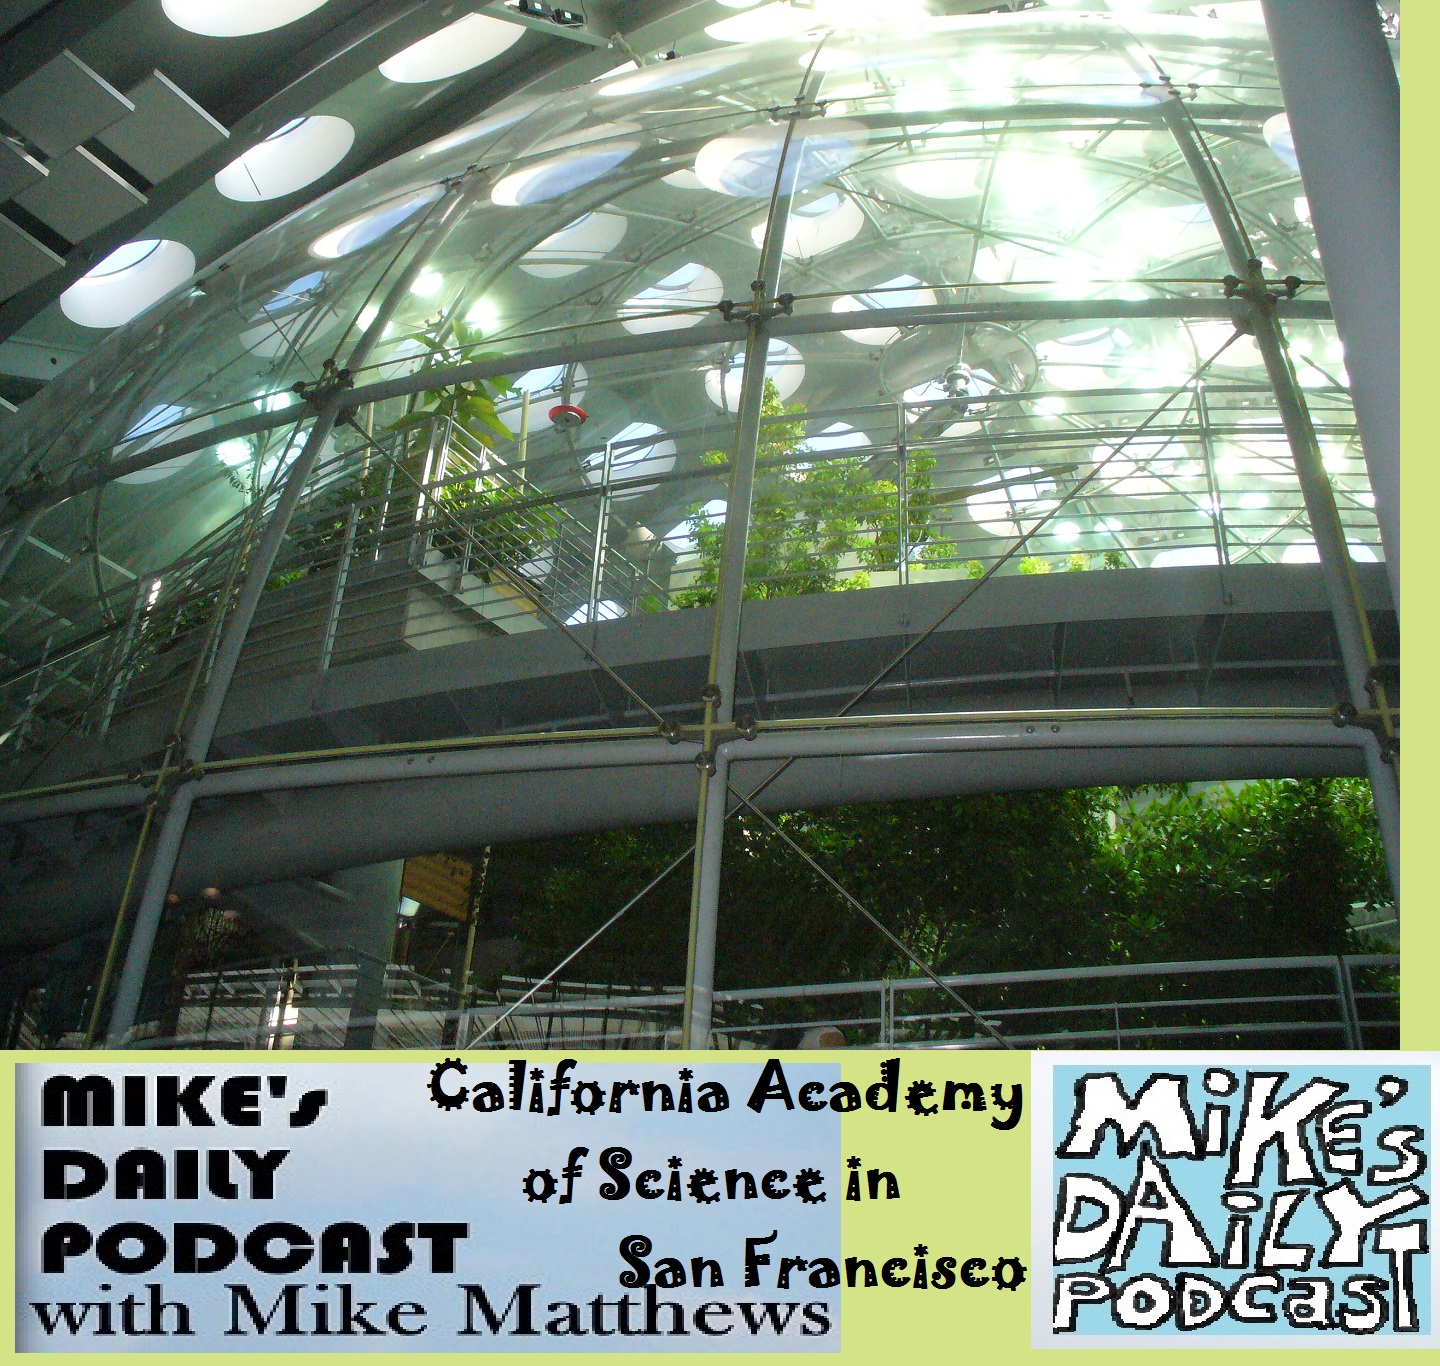 mikes-daily-podcast-1219-california-academy-of-science-sf